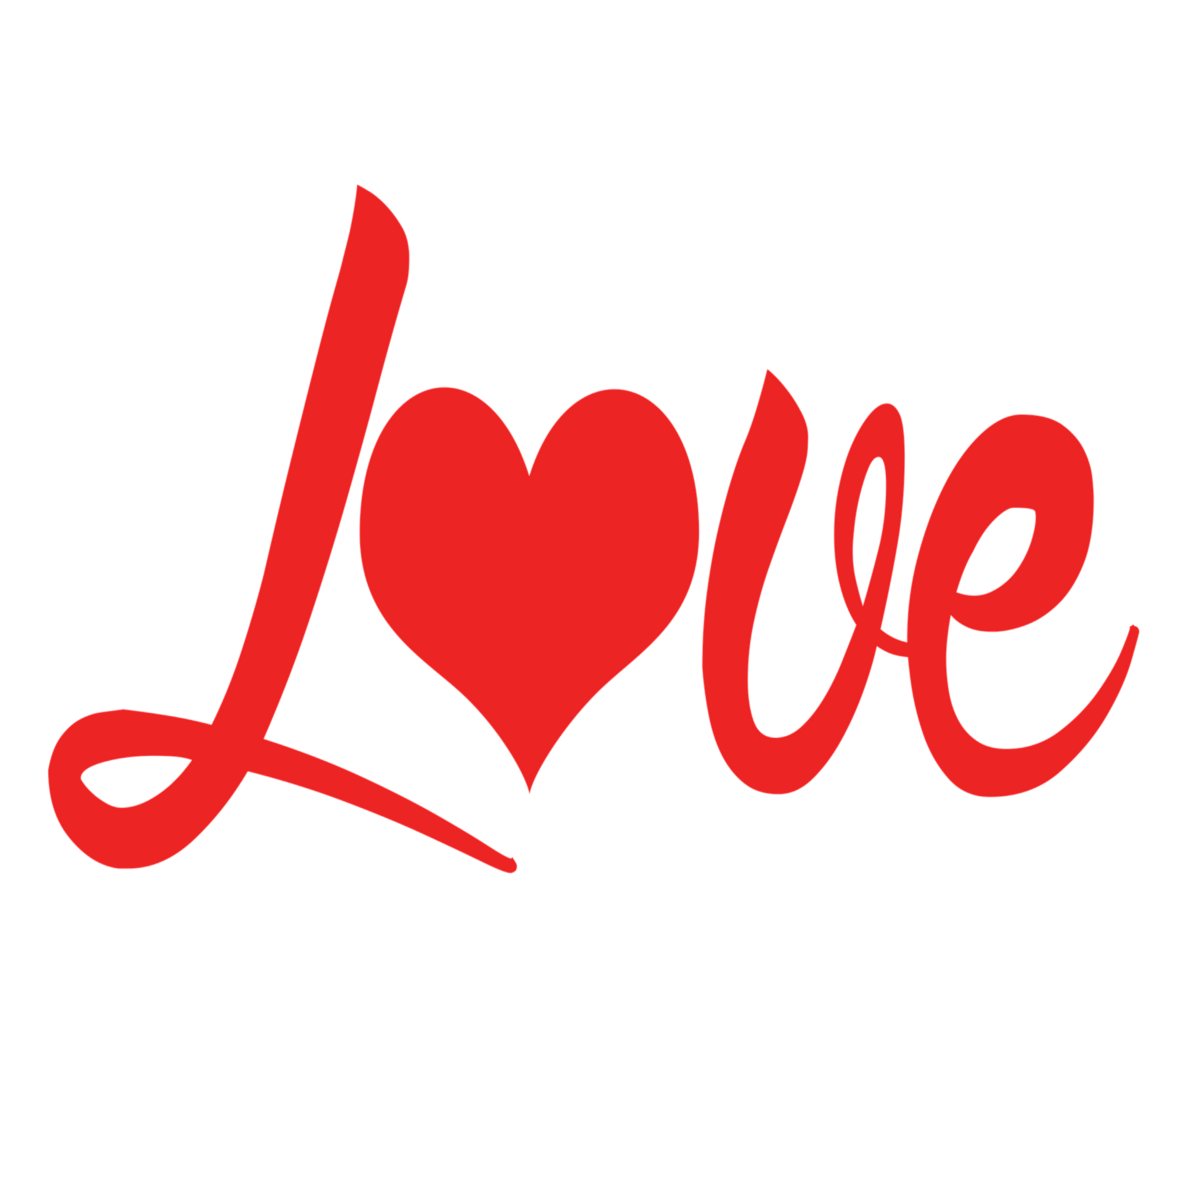 I Love You Heart Logo - When it comes to love – P.S. I Love You